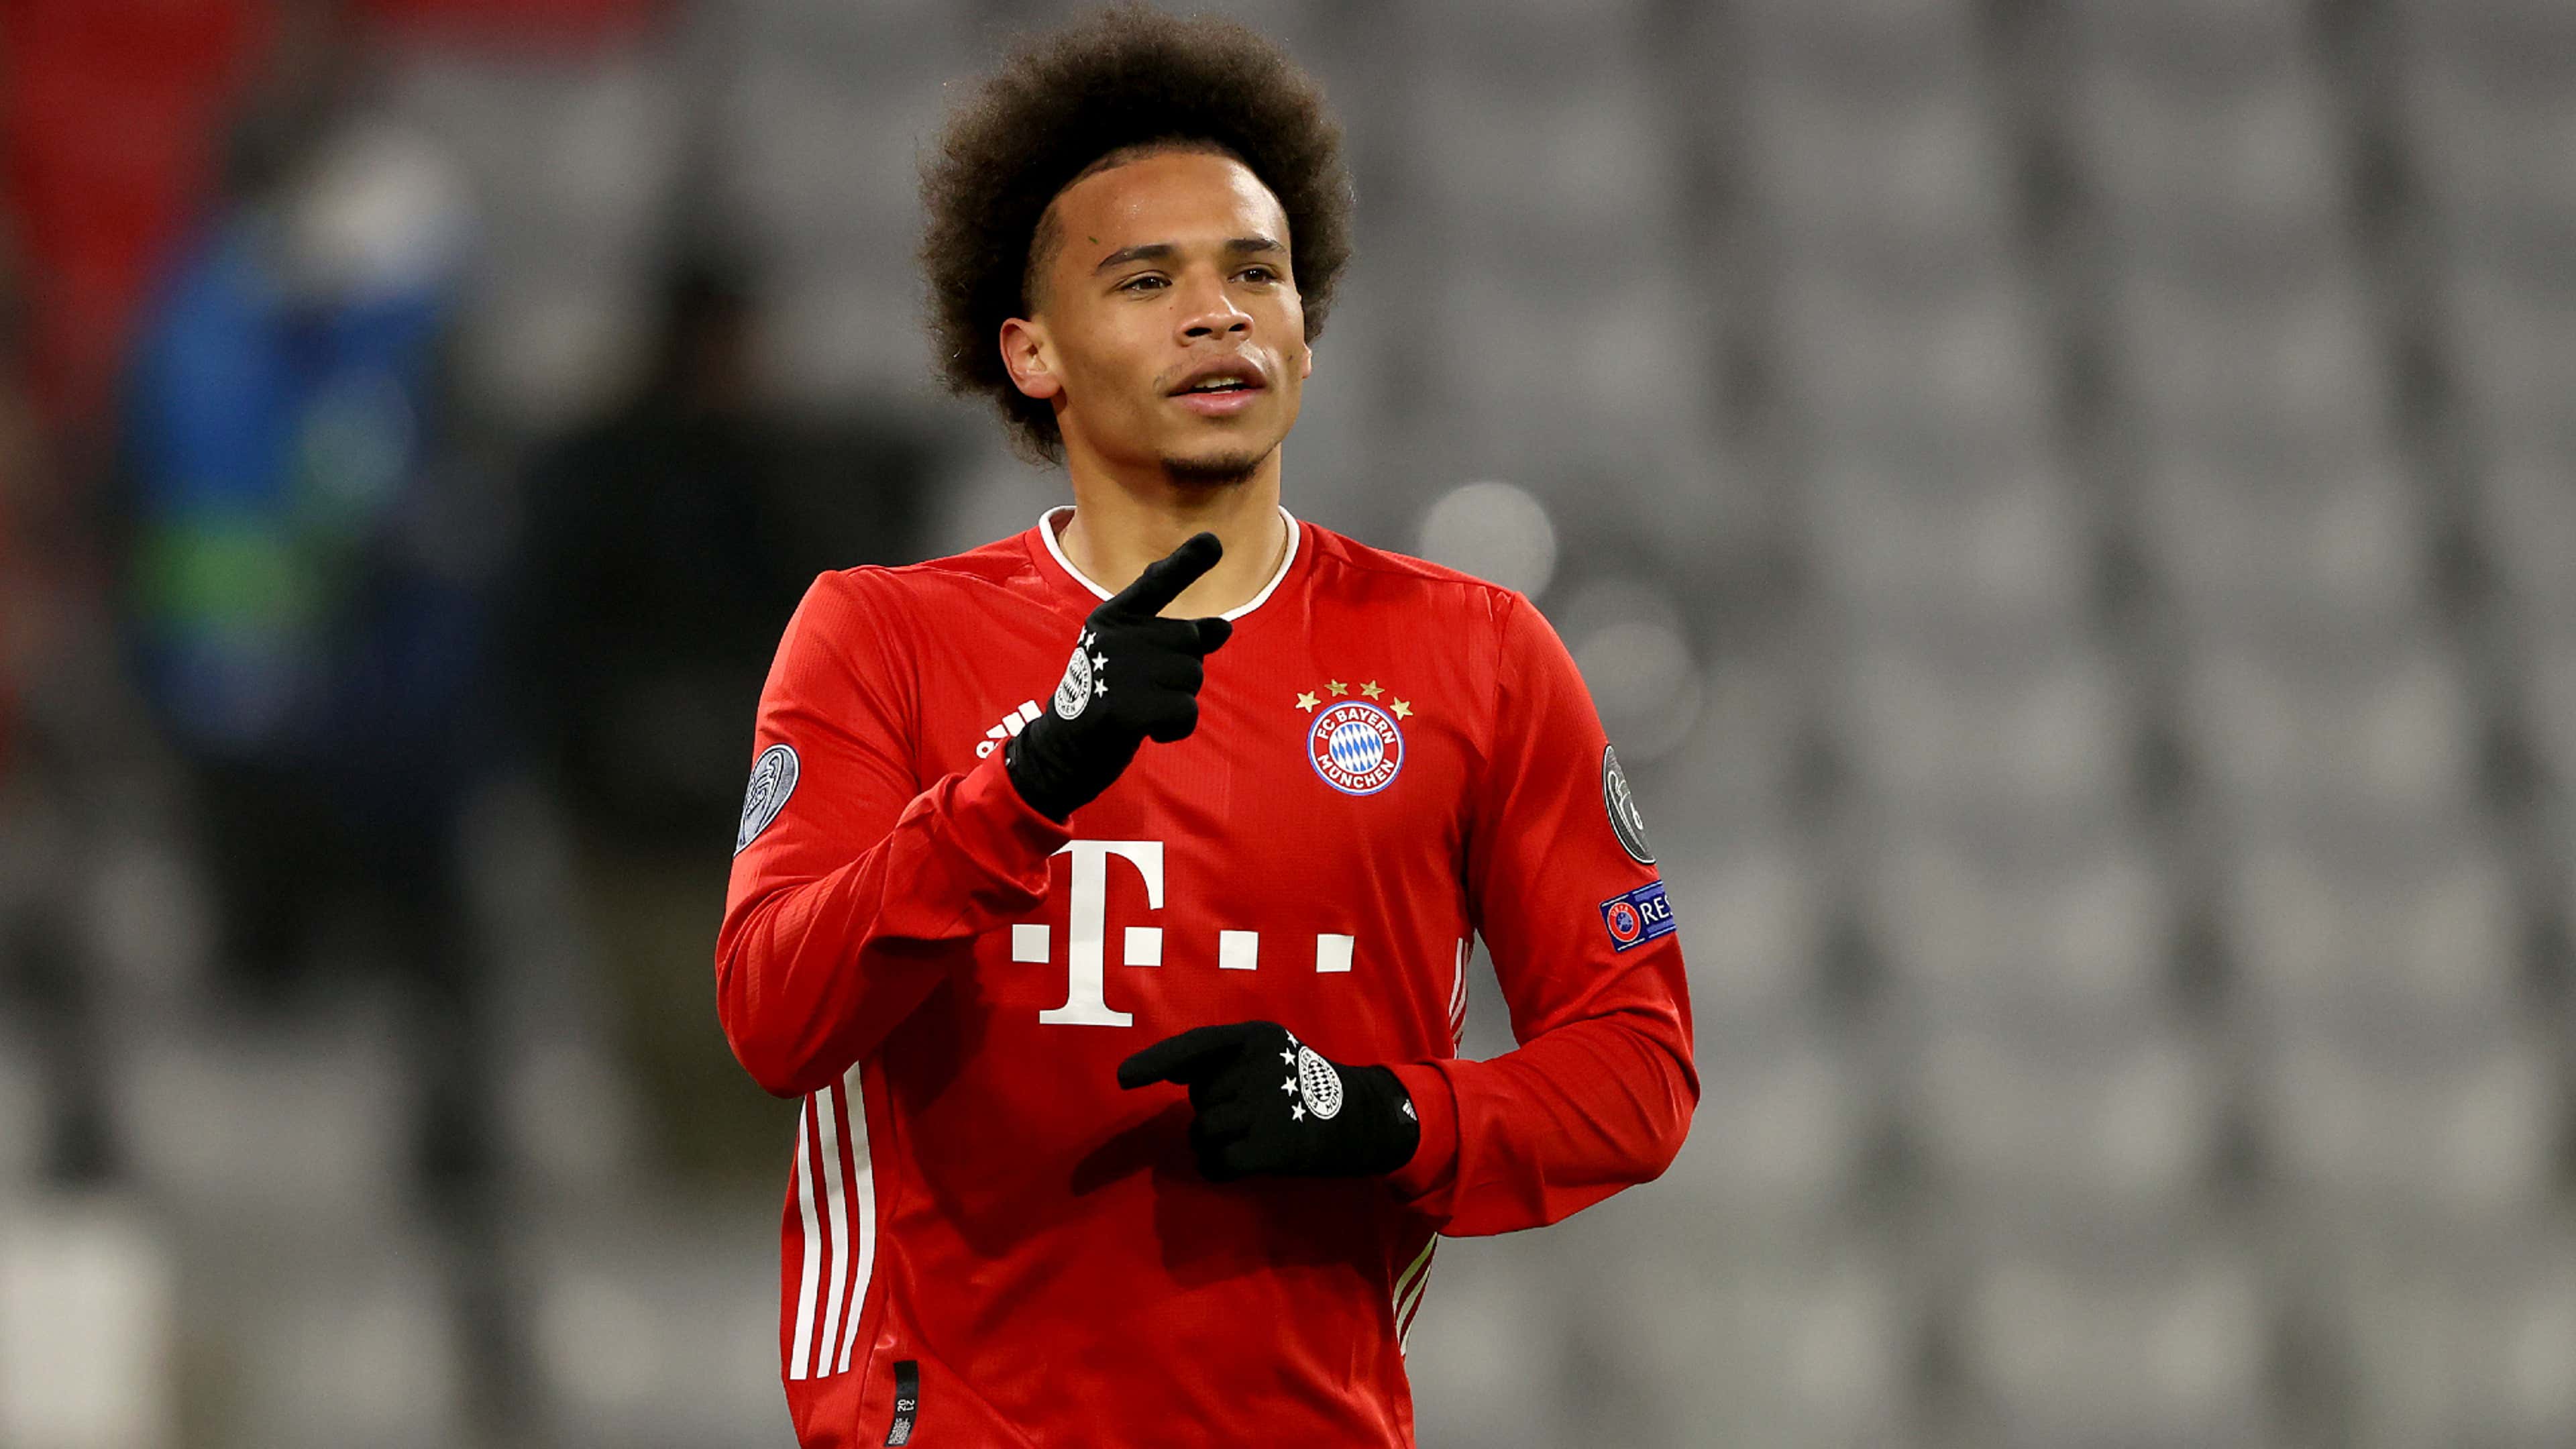 FC Bayern Munich on X: Gnabry turns provider and sets up Sané for